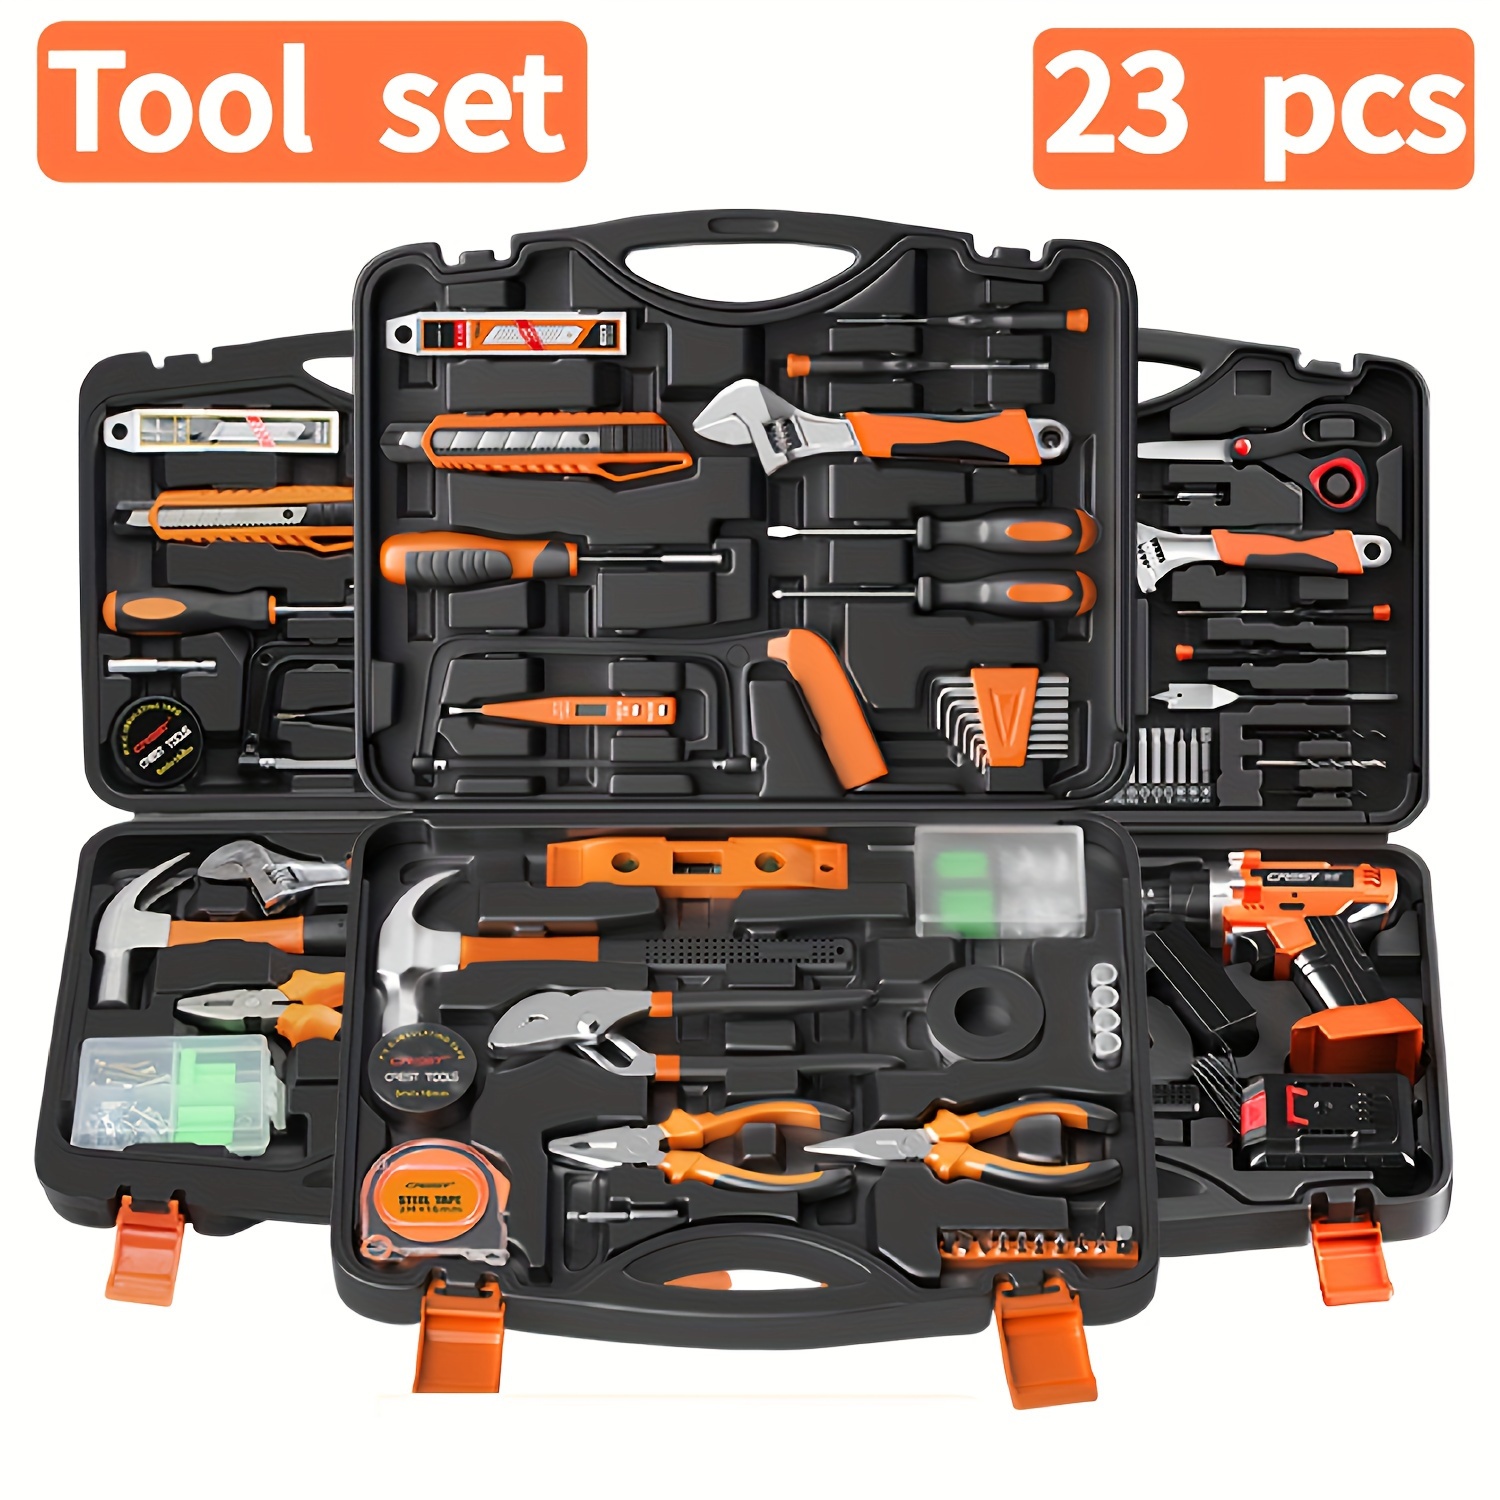 

23pcs Home Repair Tool Set, Durable Metal & Plastic Hand Tool Kit, Diy Household Toolbox With Variety Tools, Long-lasting Home Decoration And Maintenance Essentials